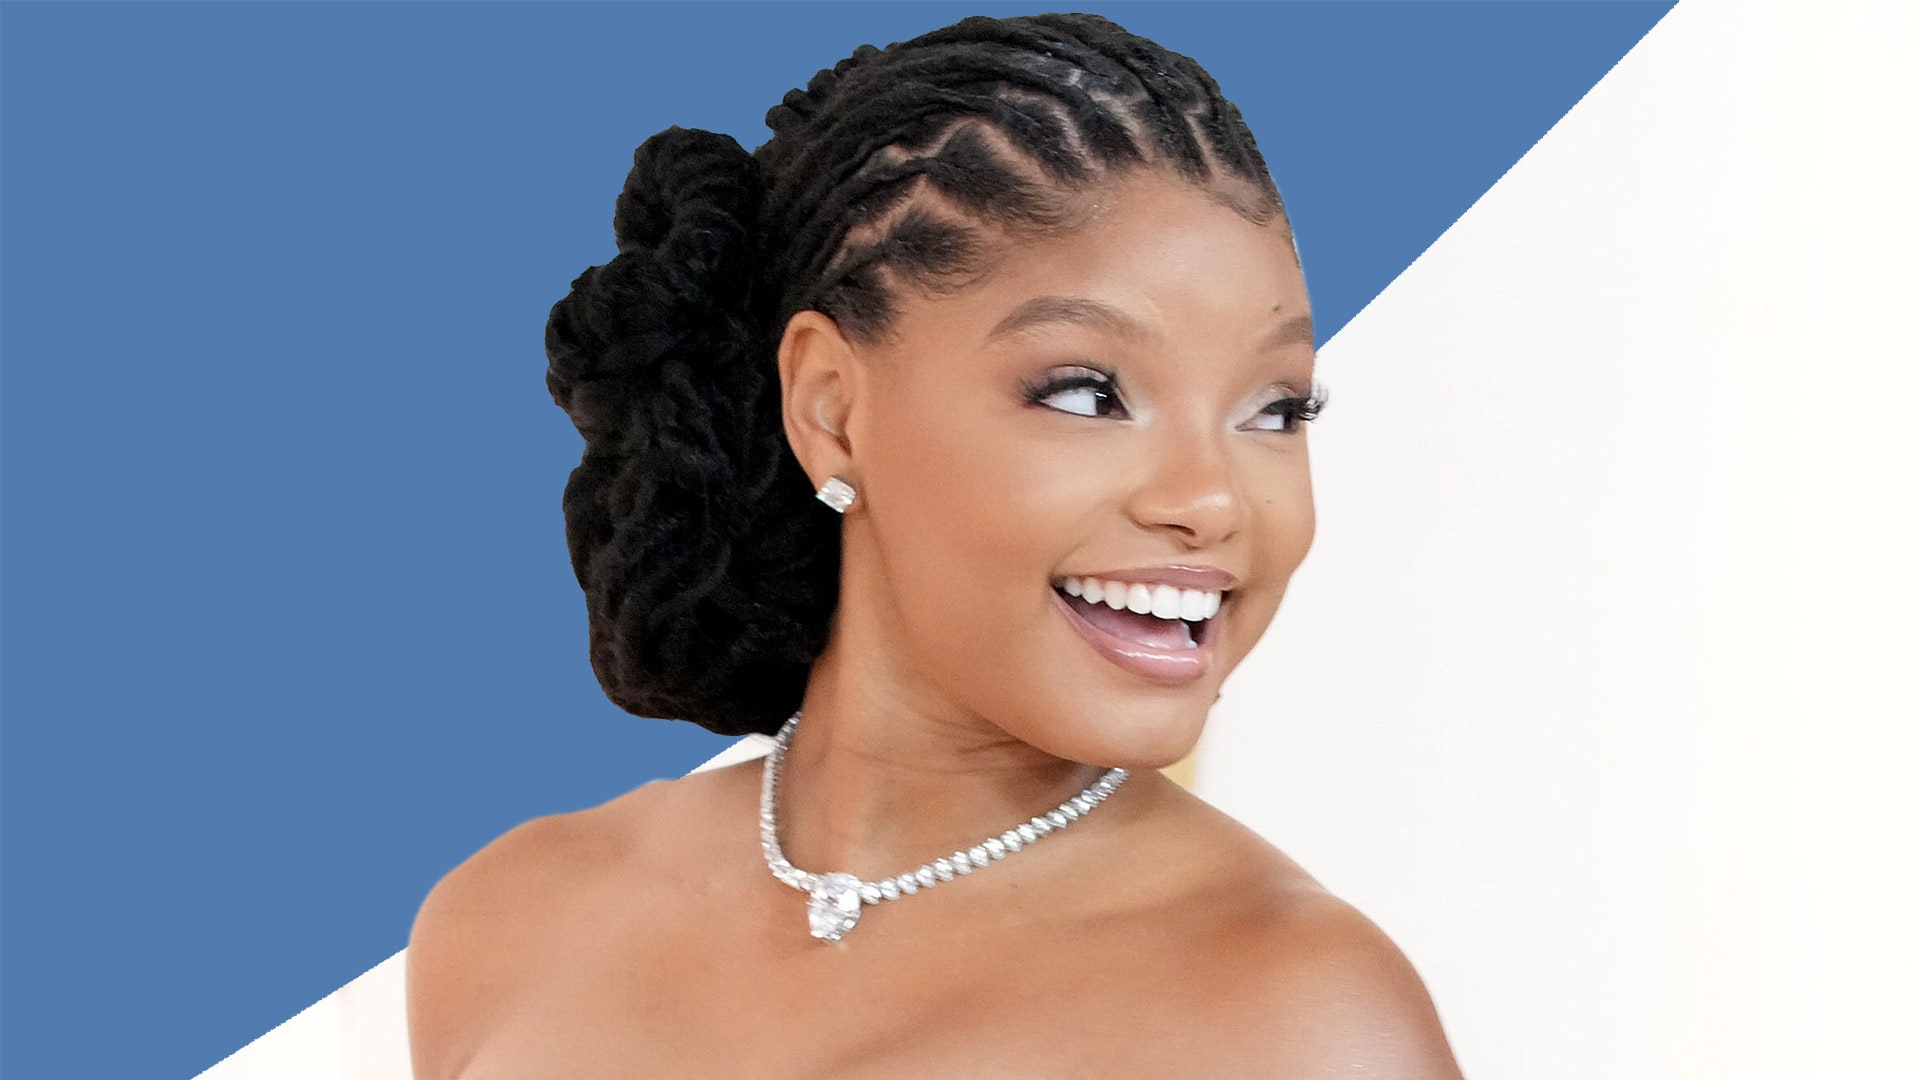 Halle Bailey's XXL Ponytail Makes Her Look Five Inches Taller Than She Actually Is